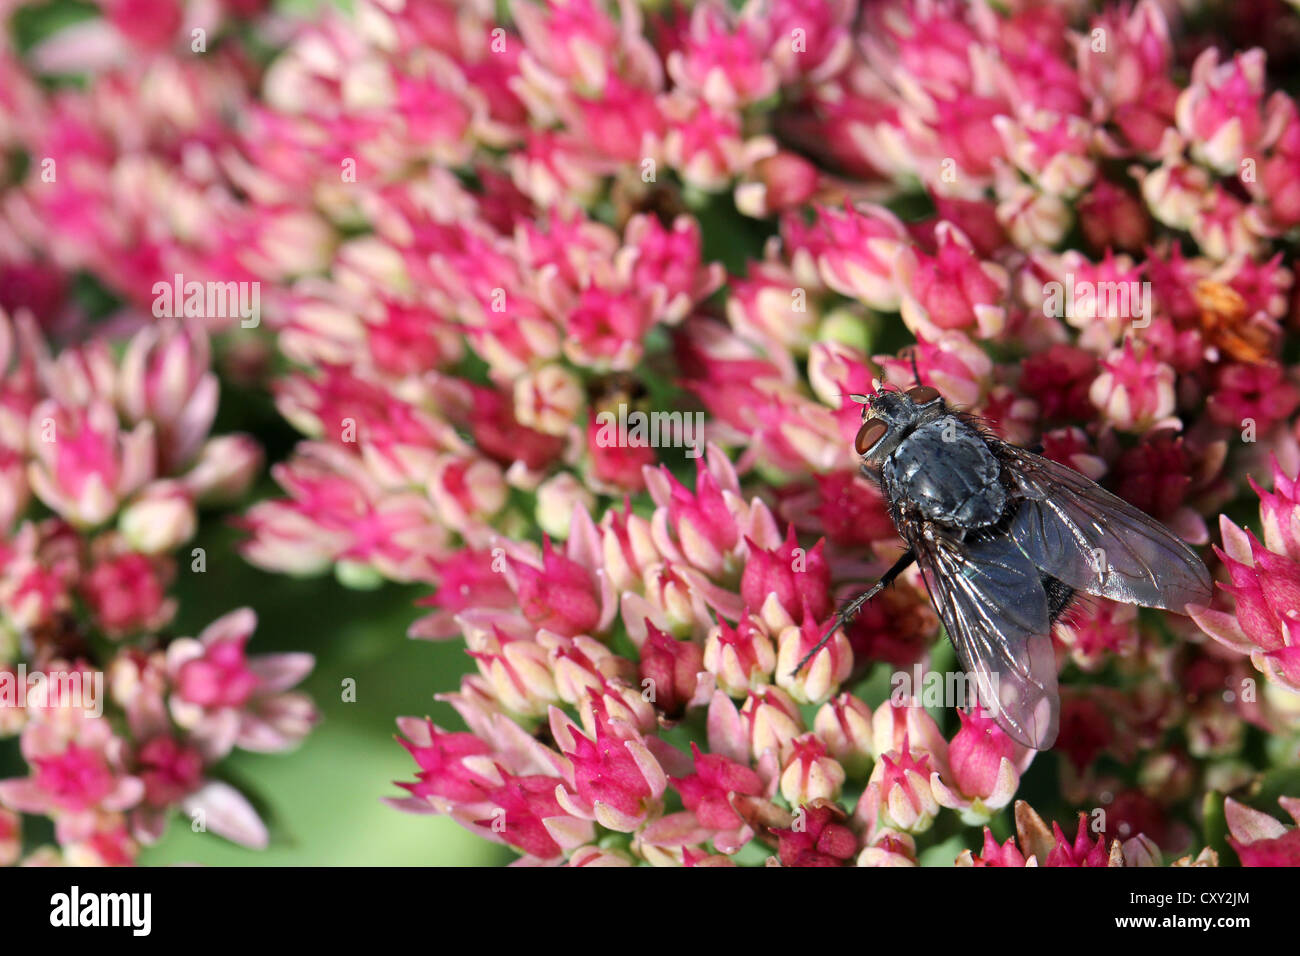 Red-eyed fly on pink Sedum flowers, focus on the fly. Stock Photo